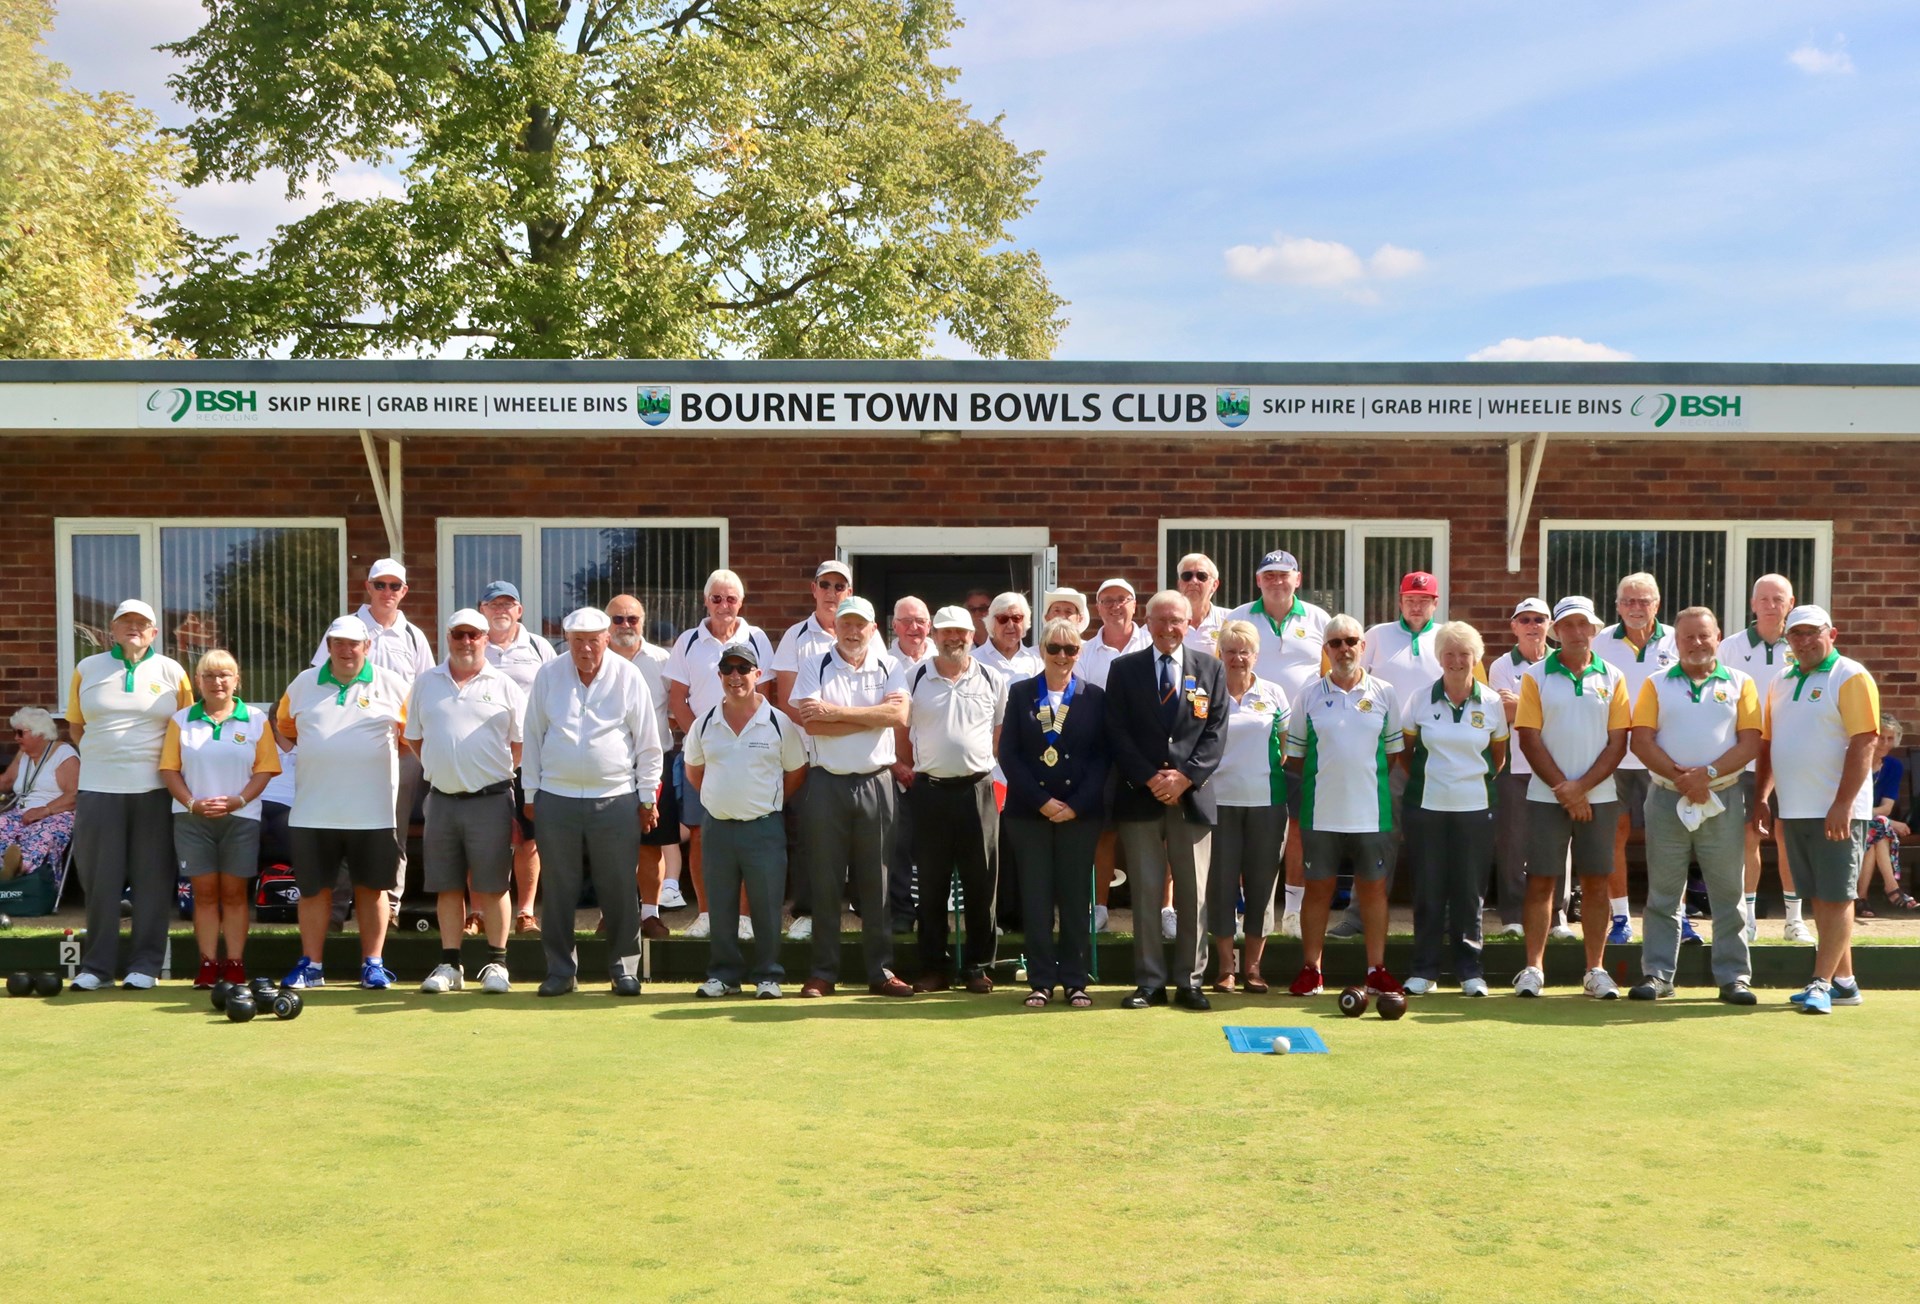 All the teams competing for the Duncomb Shield before start of play, with President Rita Downs and Chairman Charlie Underwood